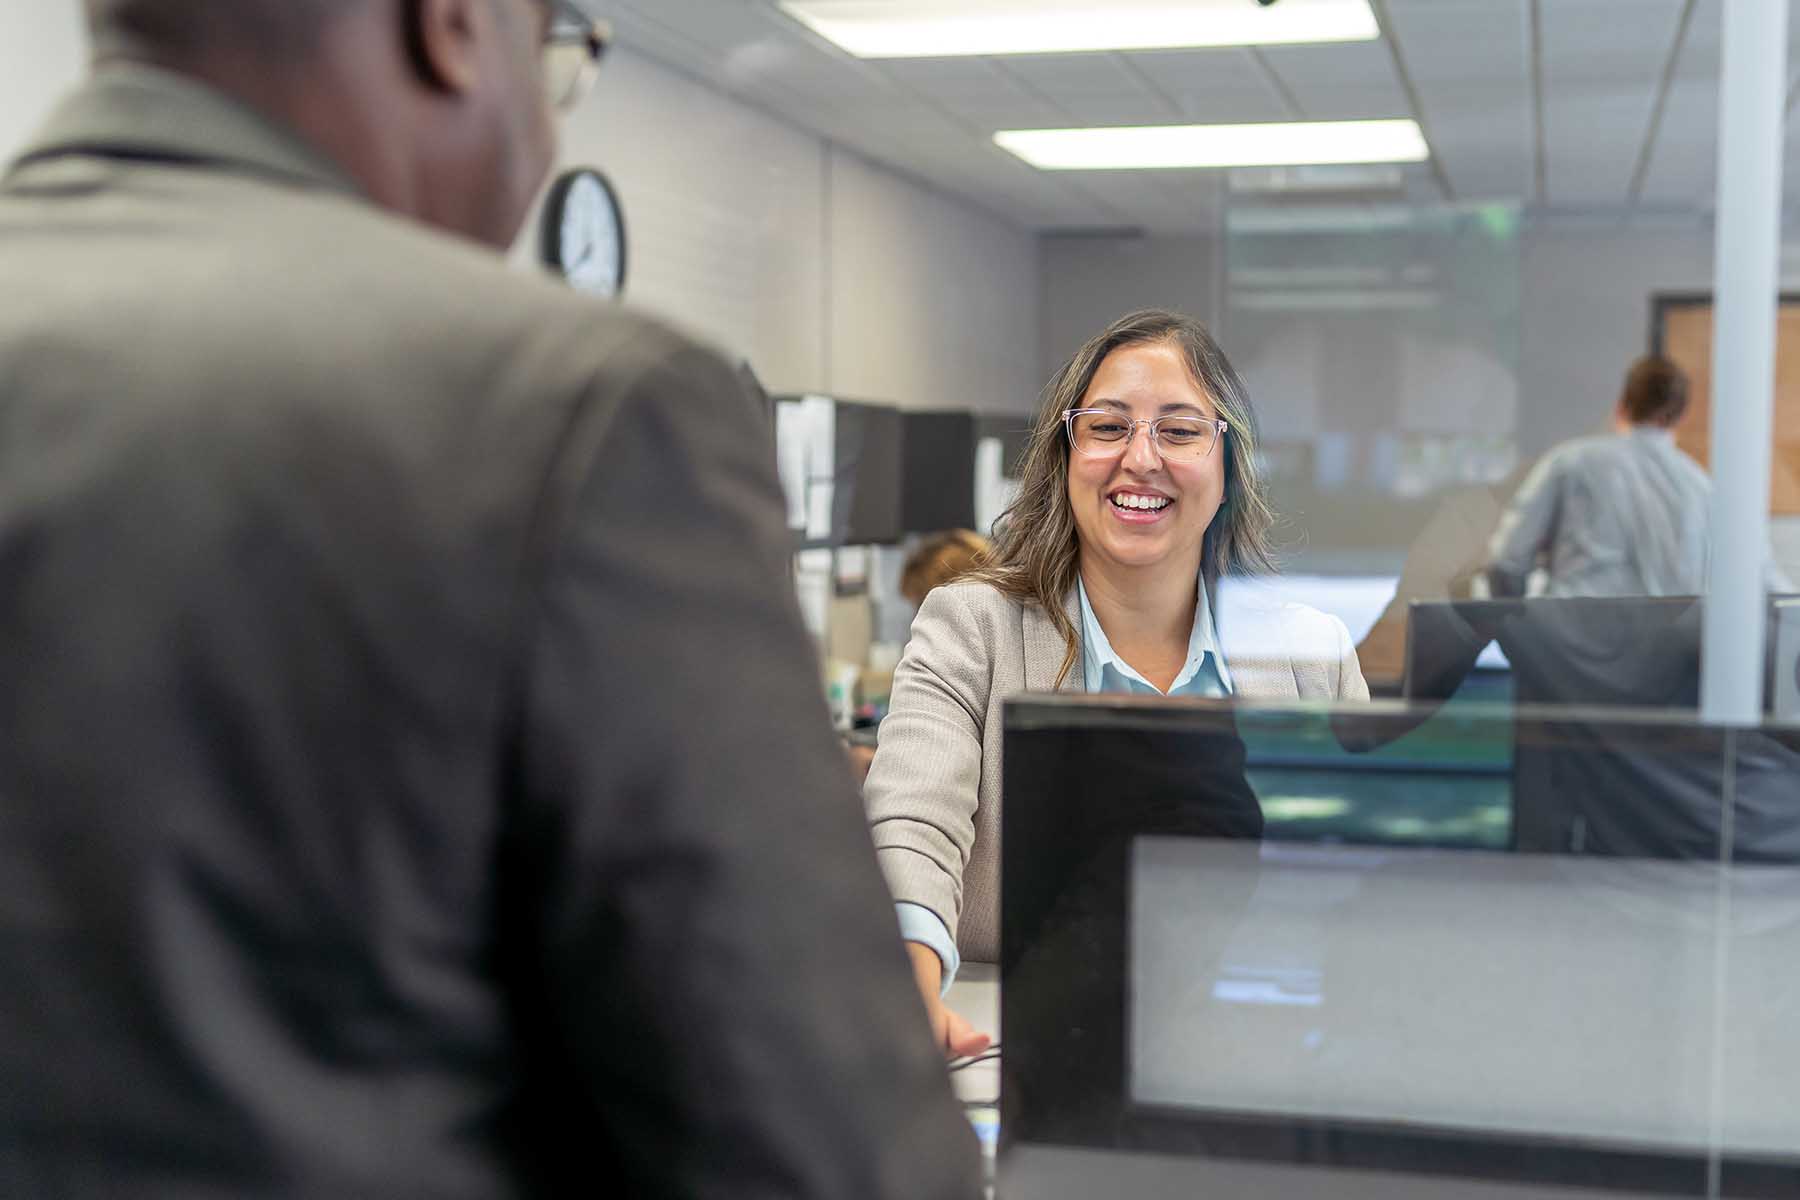 A female customer service representative of the bank smiles while she greet a customer behind the glass.